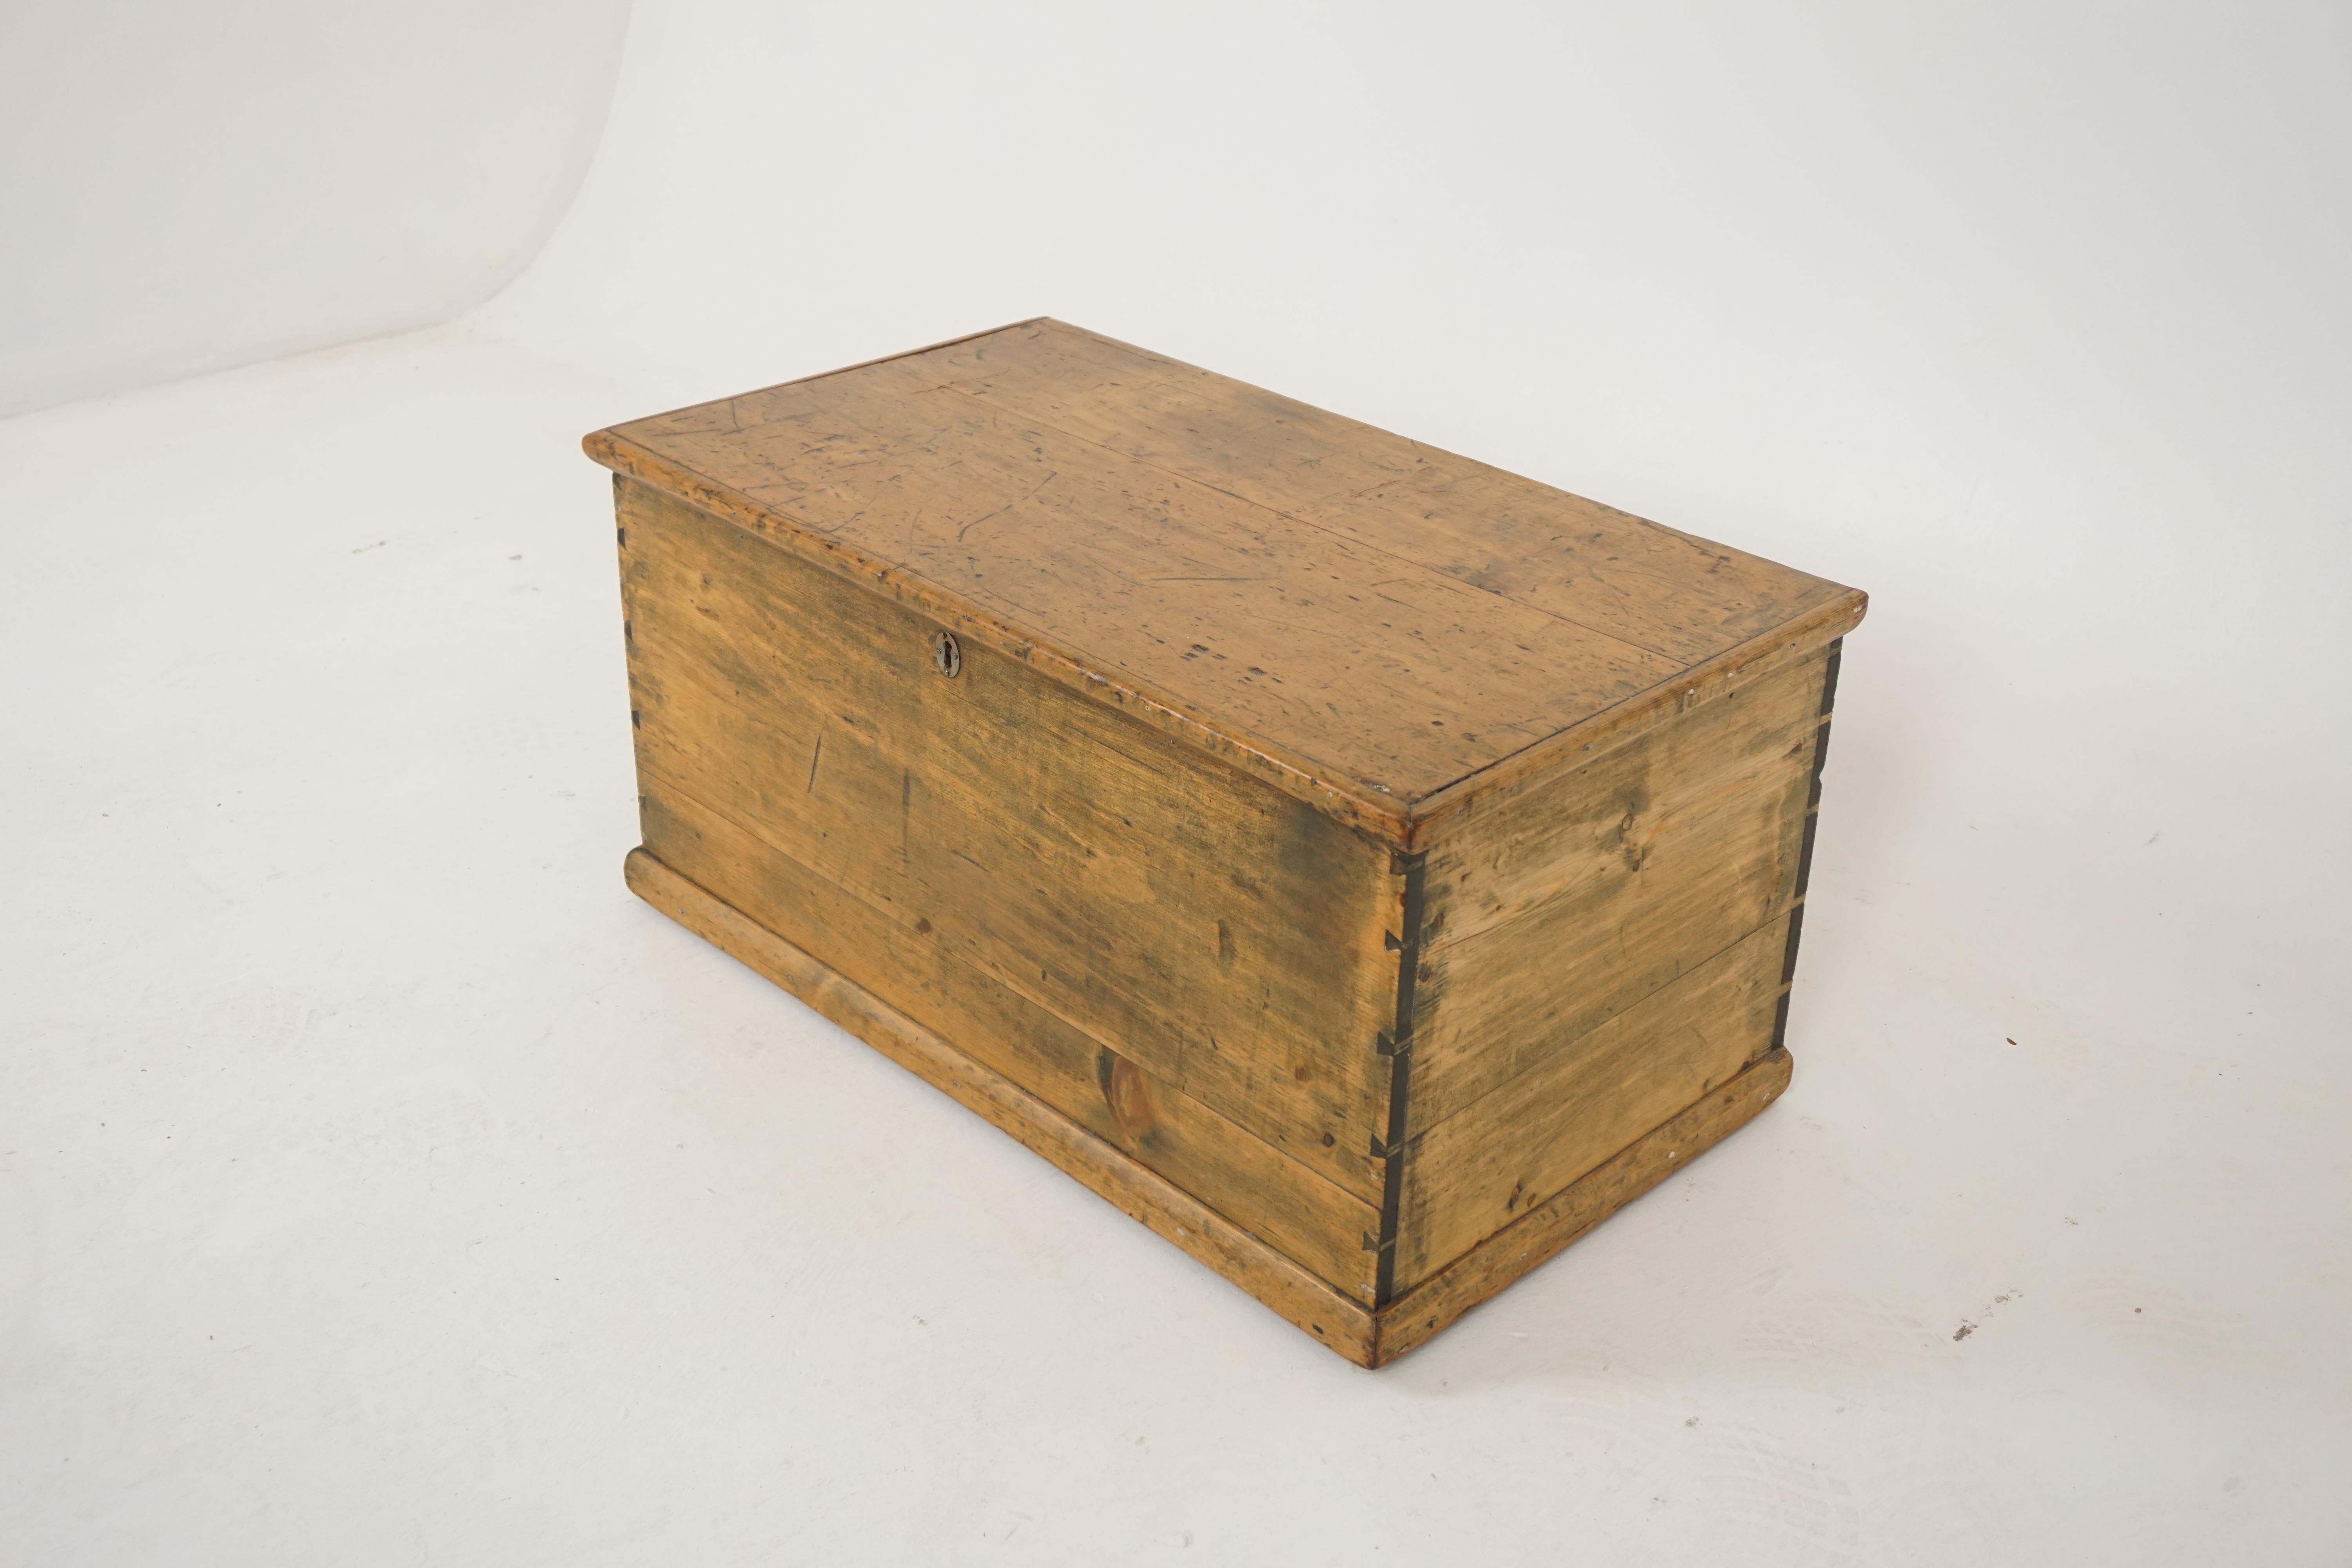 Antique pine blanket box, Victorian trunk or coffee table, antique furniture, Scotland 1880, B2012

Scotland 1880
Solid pine
Rectangular top
Dovetailed construction
Top lifts up to reveal large storage space
Candles box to the left
Iron